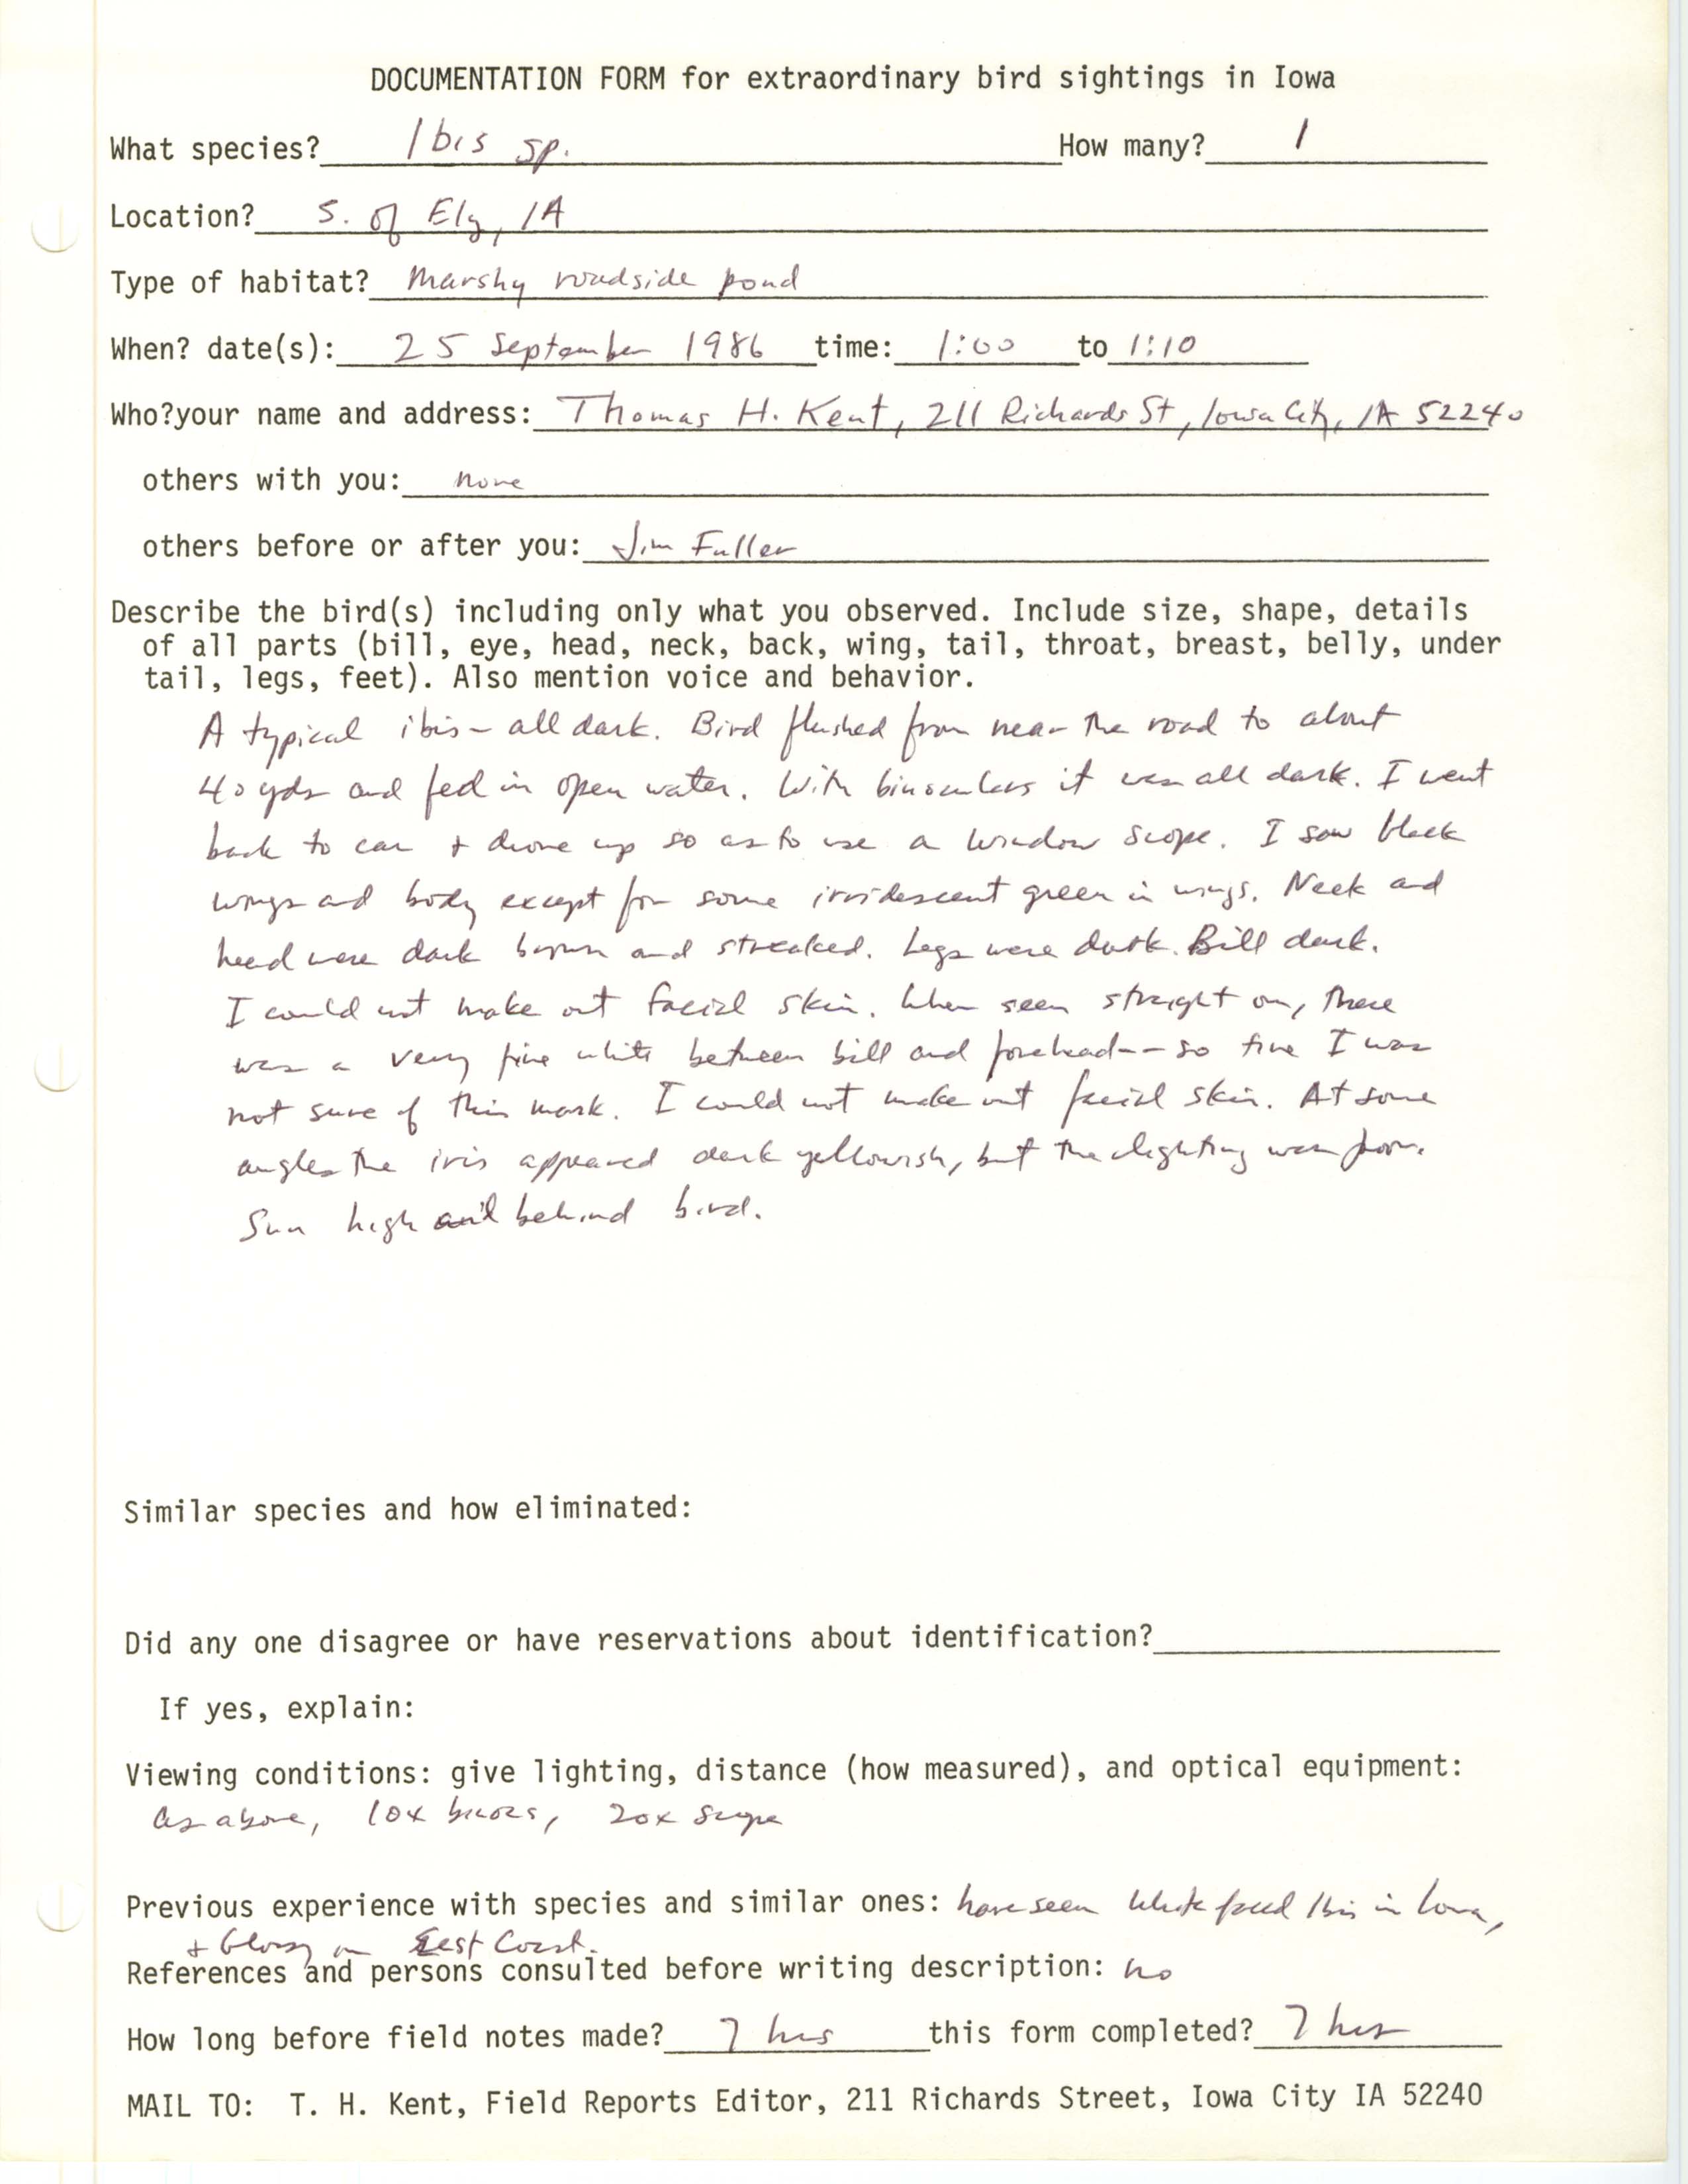 Rare bird documentation form for Ibis species at Ely, 1986